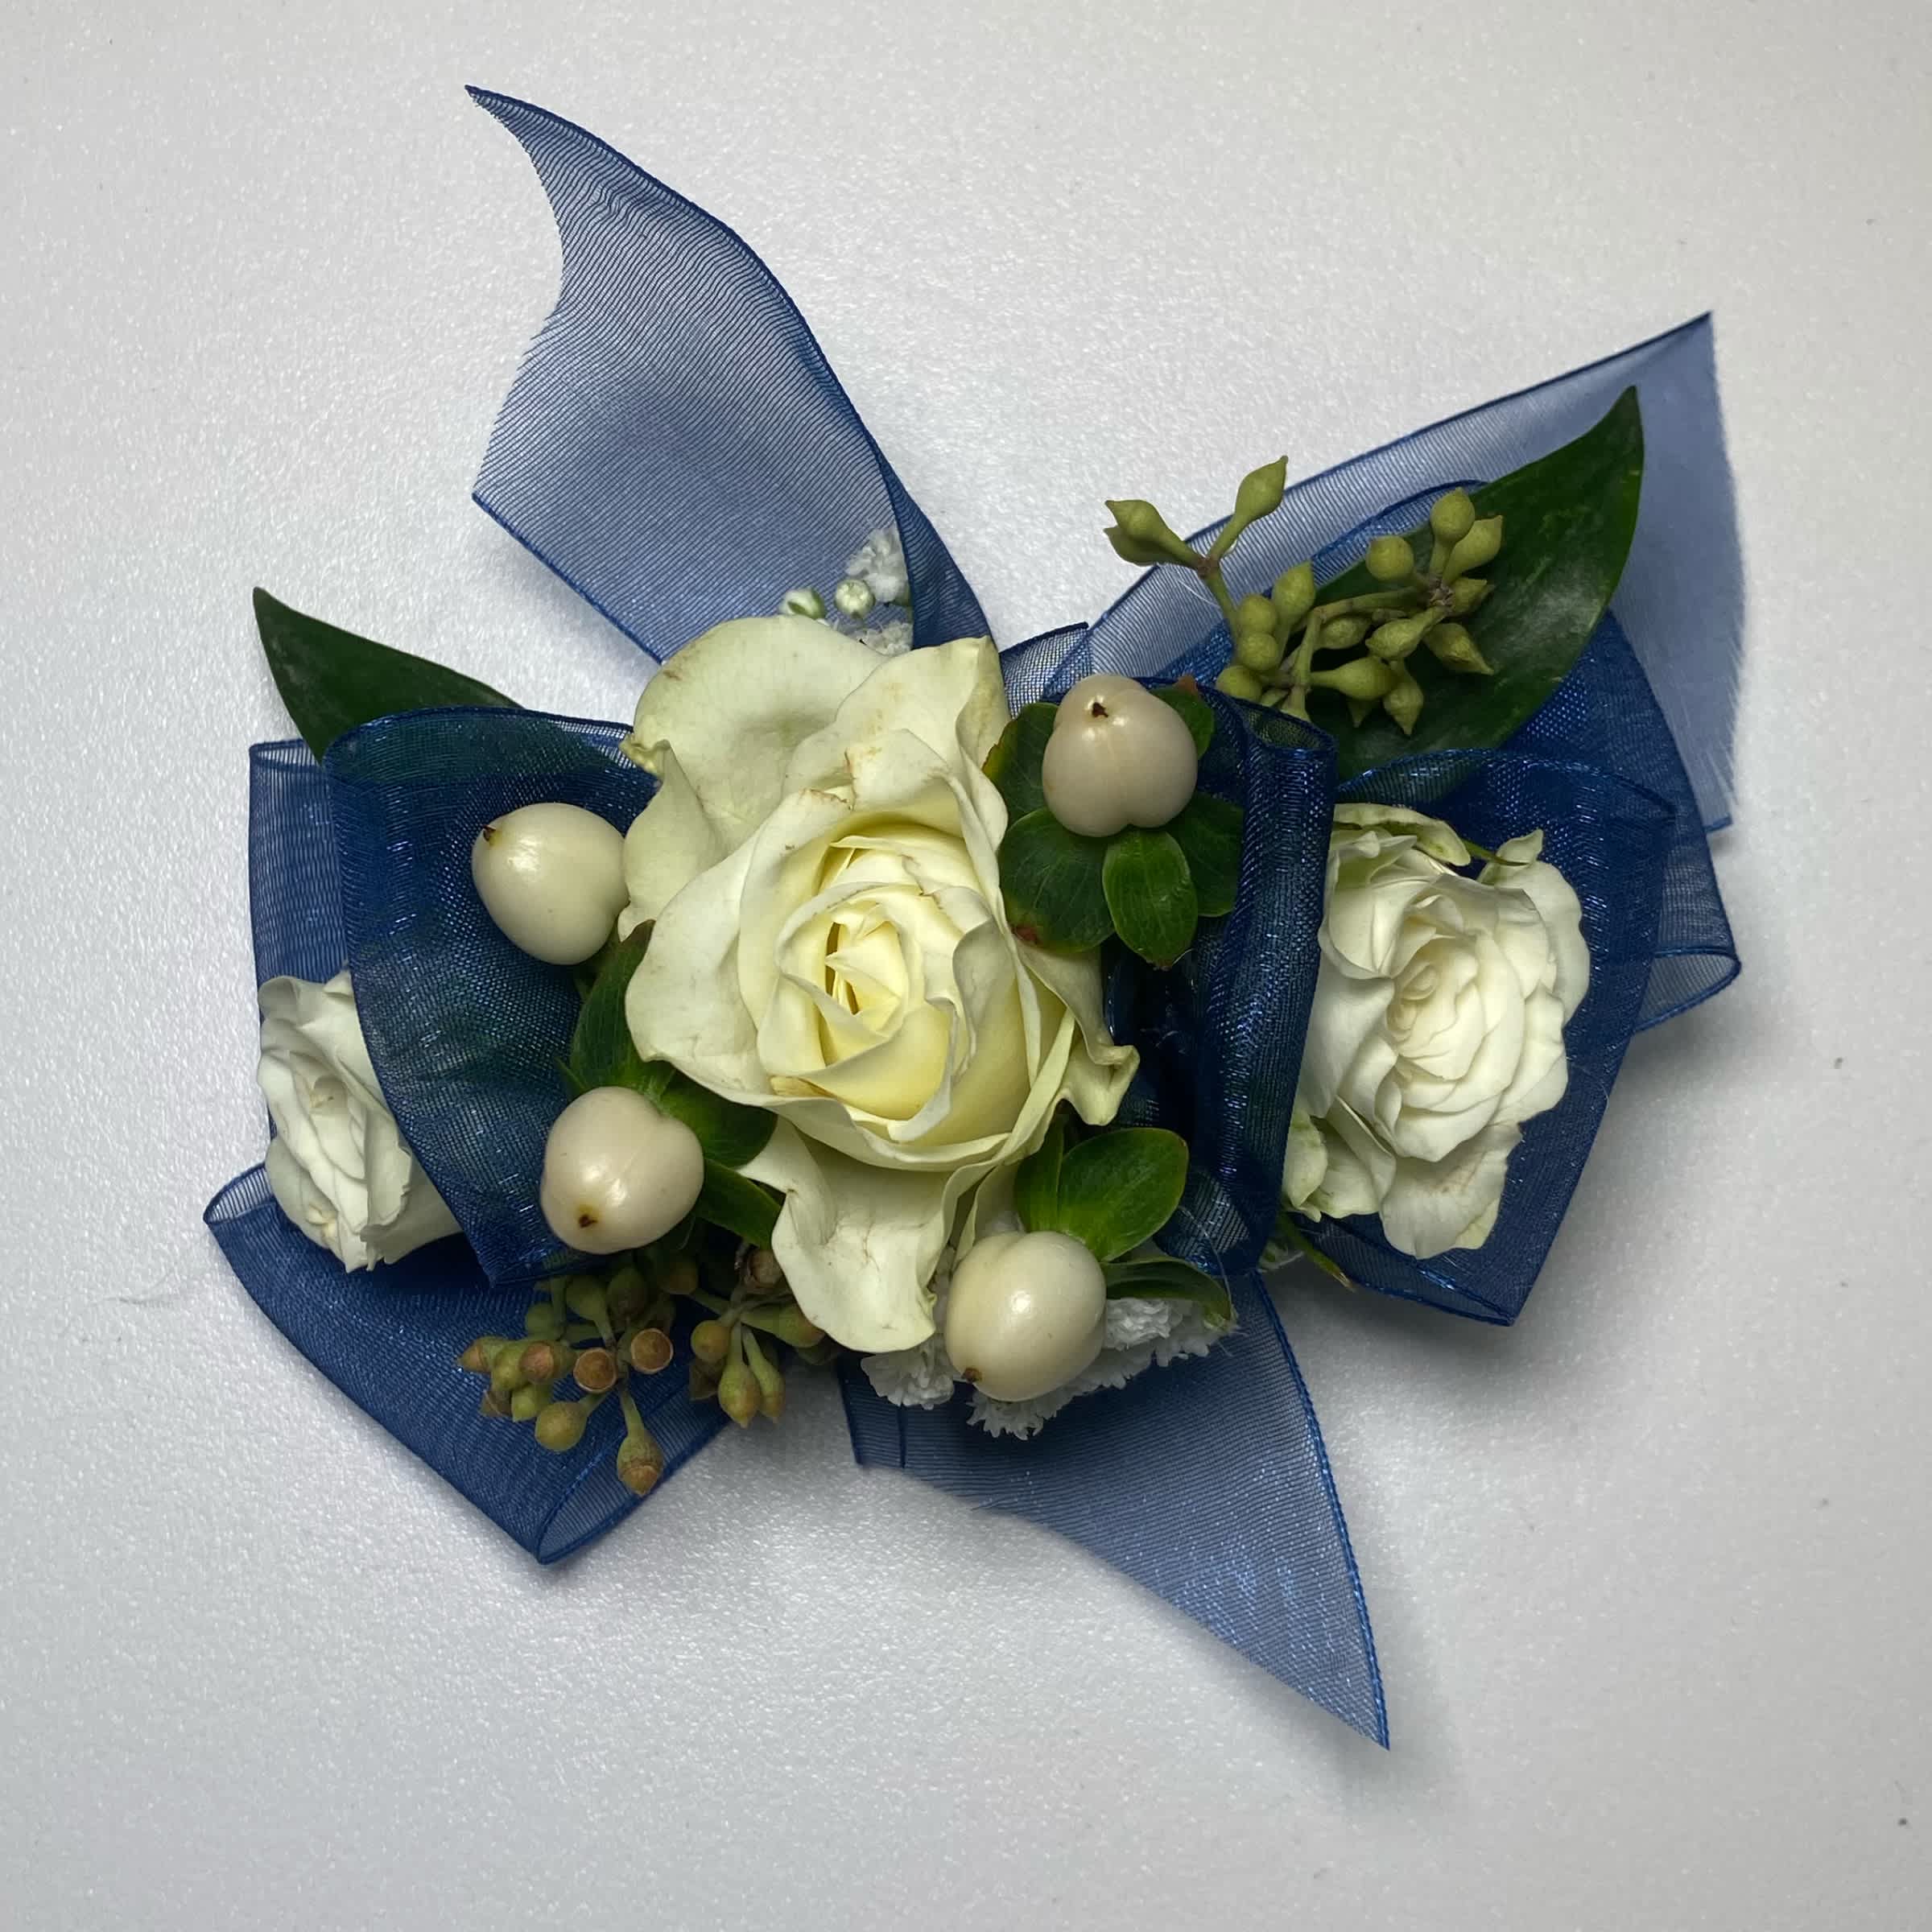 Navy Blue/ White Rose Wrist Corsage - Prom/ Wedding - This White Rose Corsage Includes an Adult Size Elastic Wristband, Navy Blue Chiffon Ribbon, White Spray Roses, Hypericum Berries, Gentle Greenery and Seeded Eucalyptus. Or as Similar as Possible.